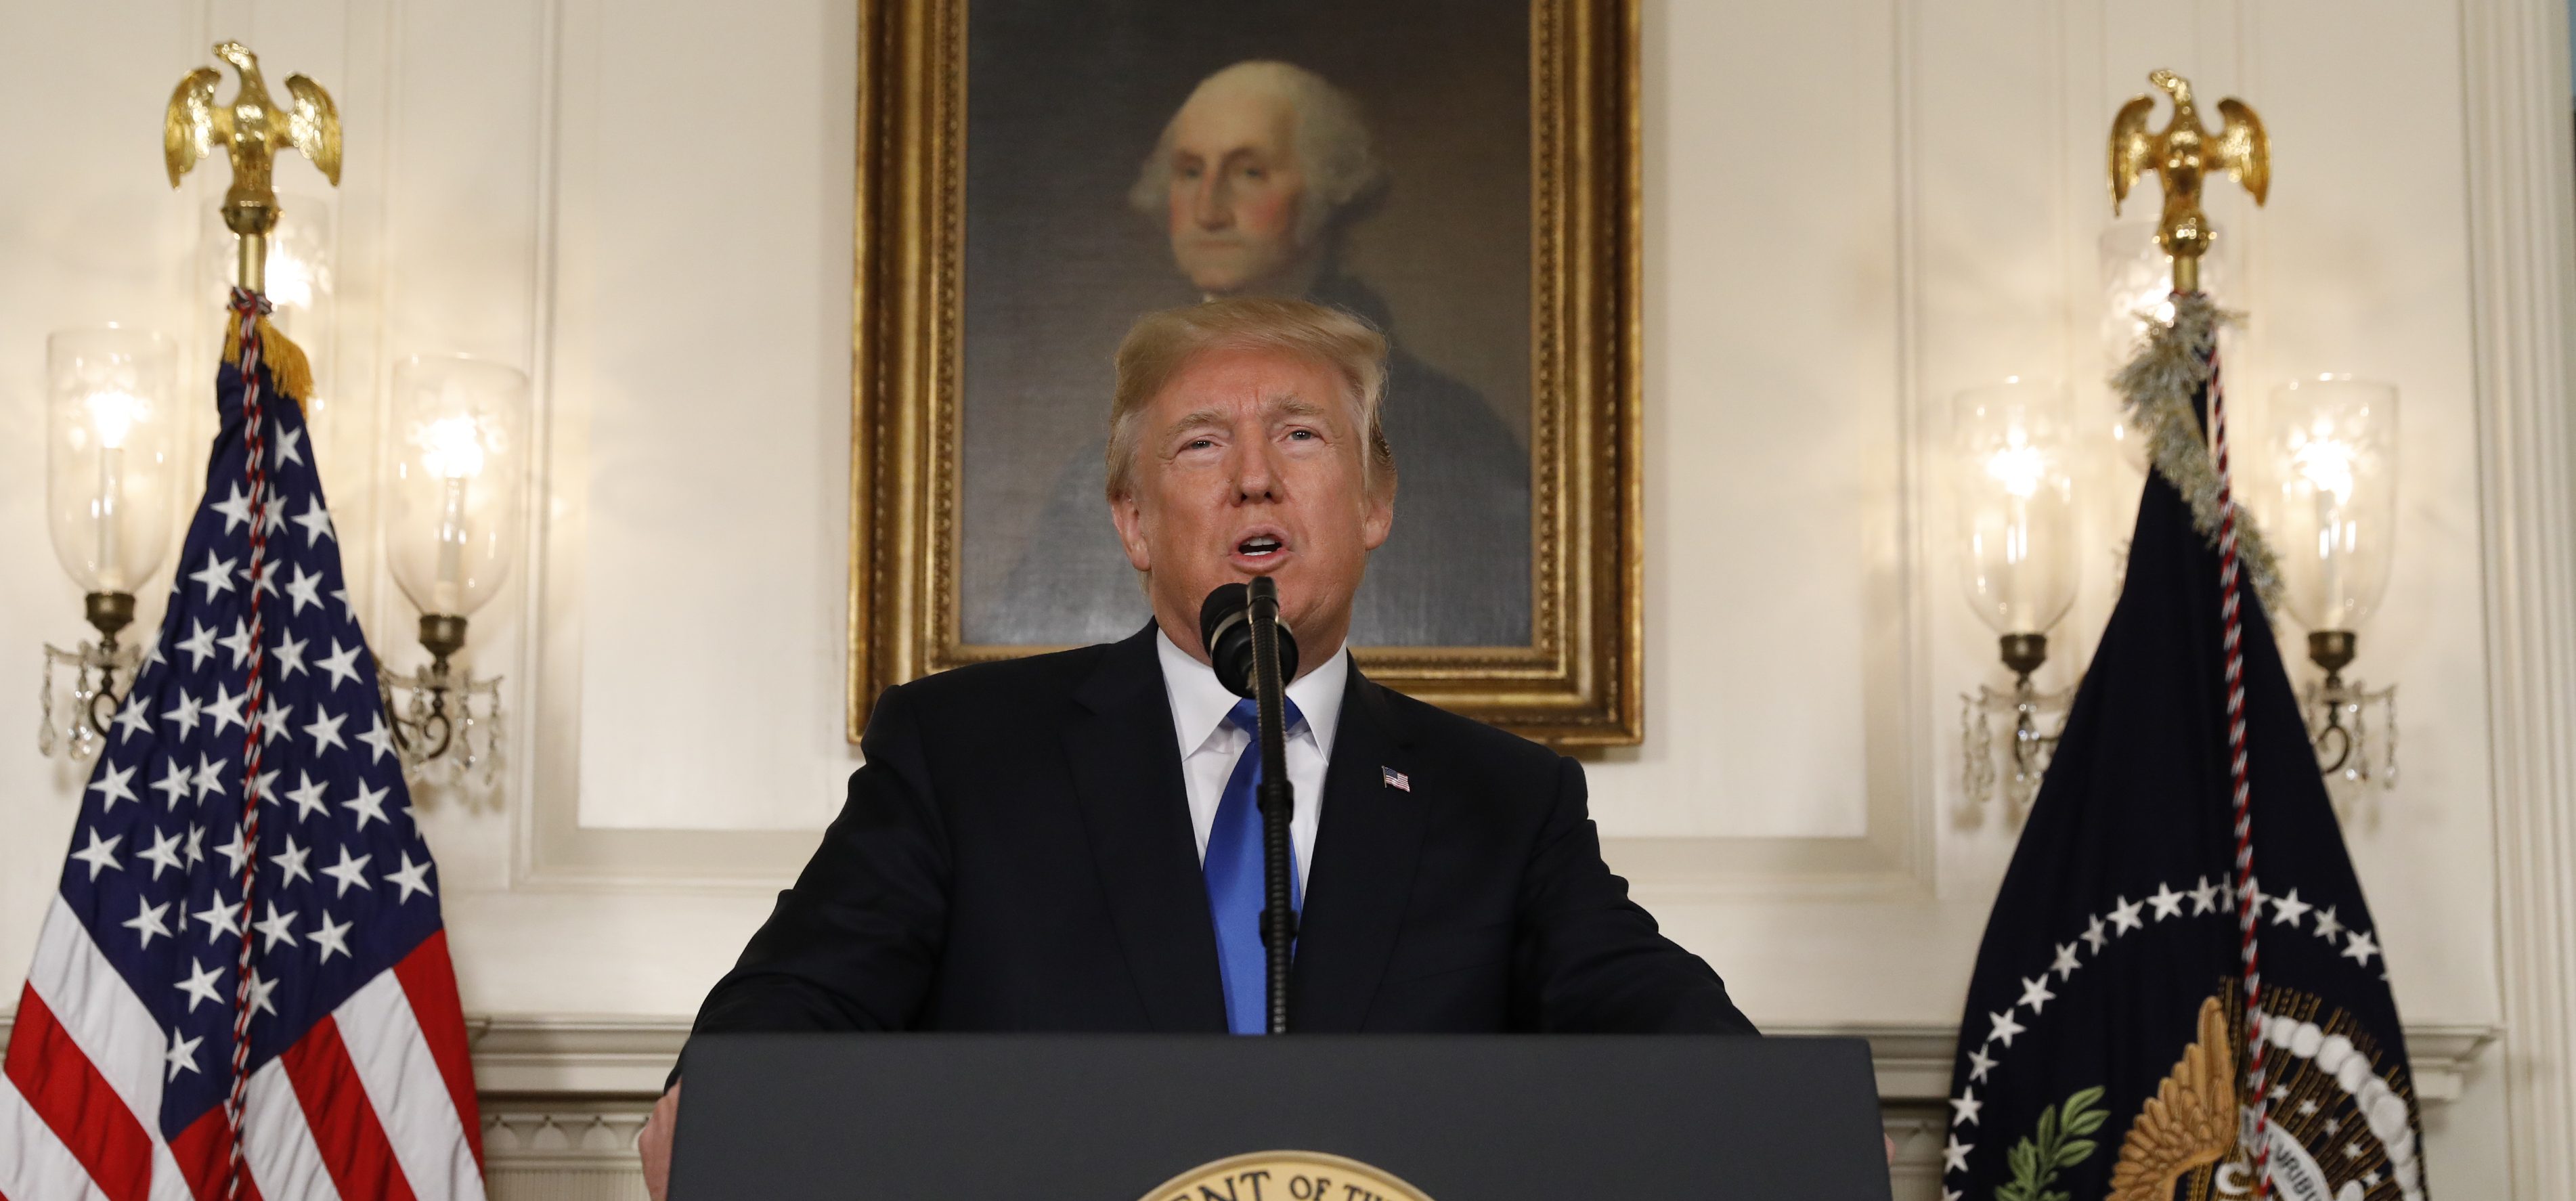 U.S. President Donald Trump speaks about the Iran nuclear deal in the Diplomatic Room of the White House in Washington, U.S., October 13, 2017. REUTERS/Kevin Lamarque - HP1EDAD1B8T9R